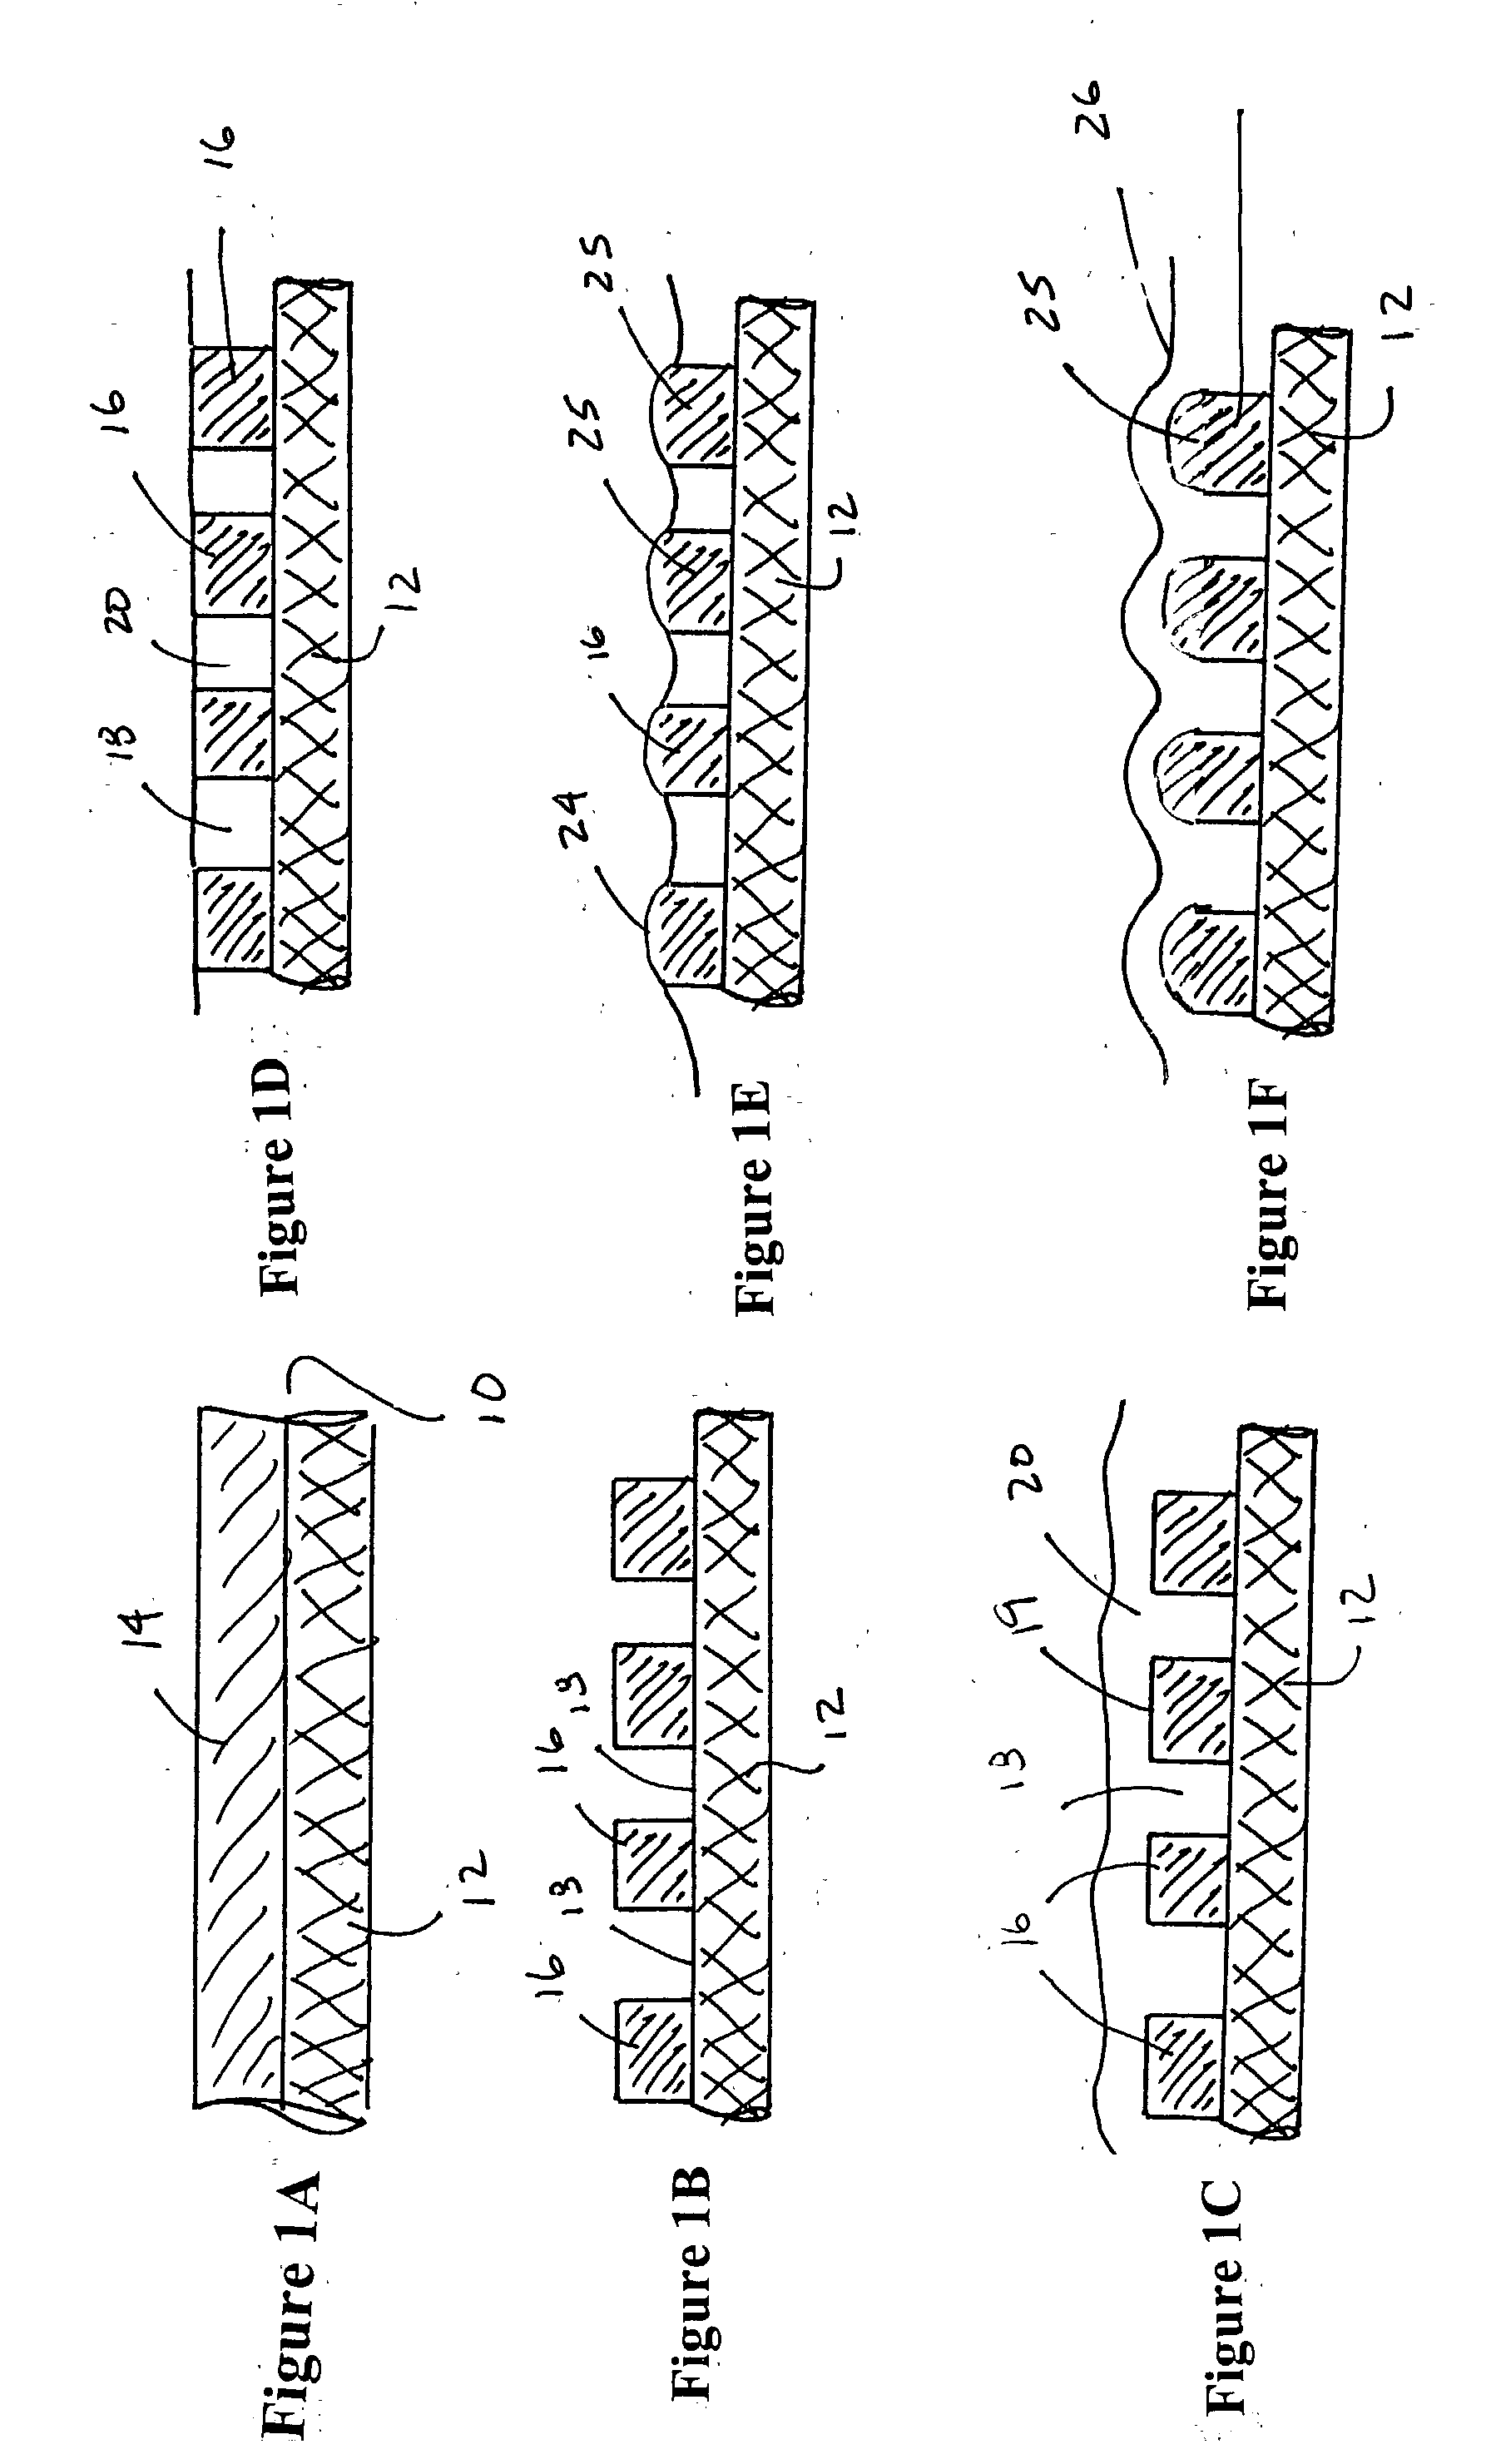 Microlens array fabrication using CMP